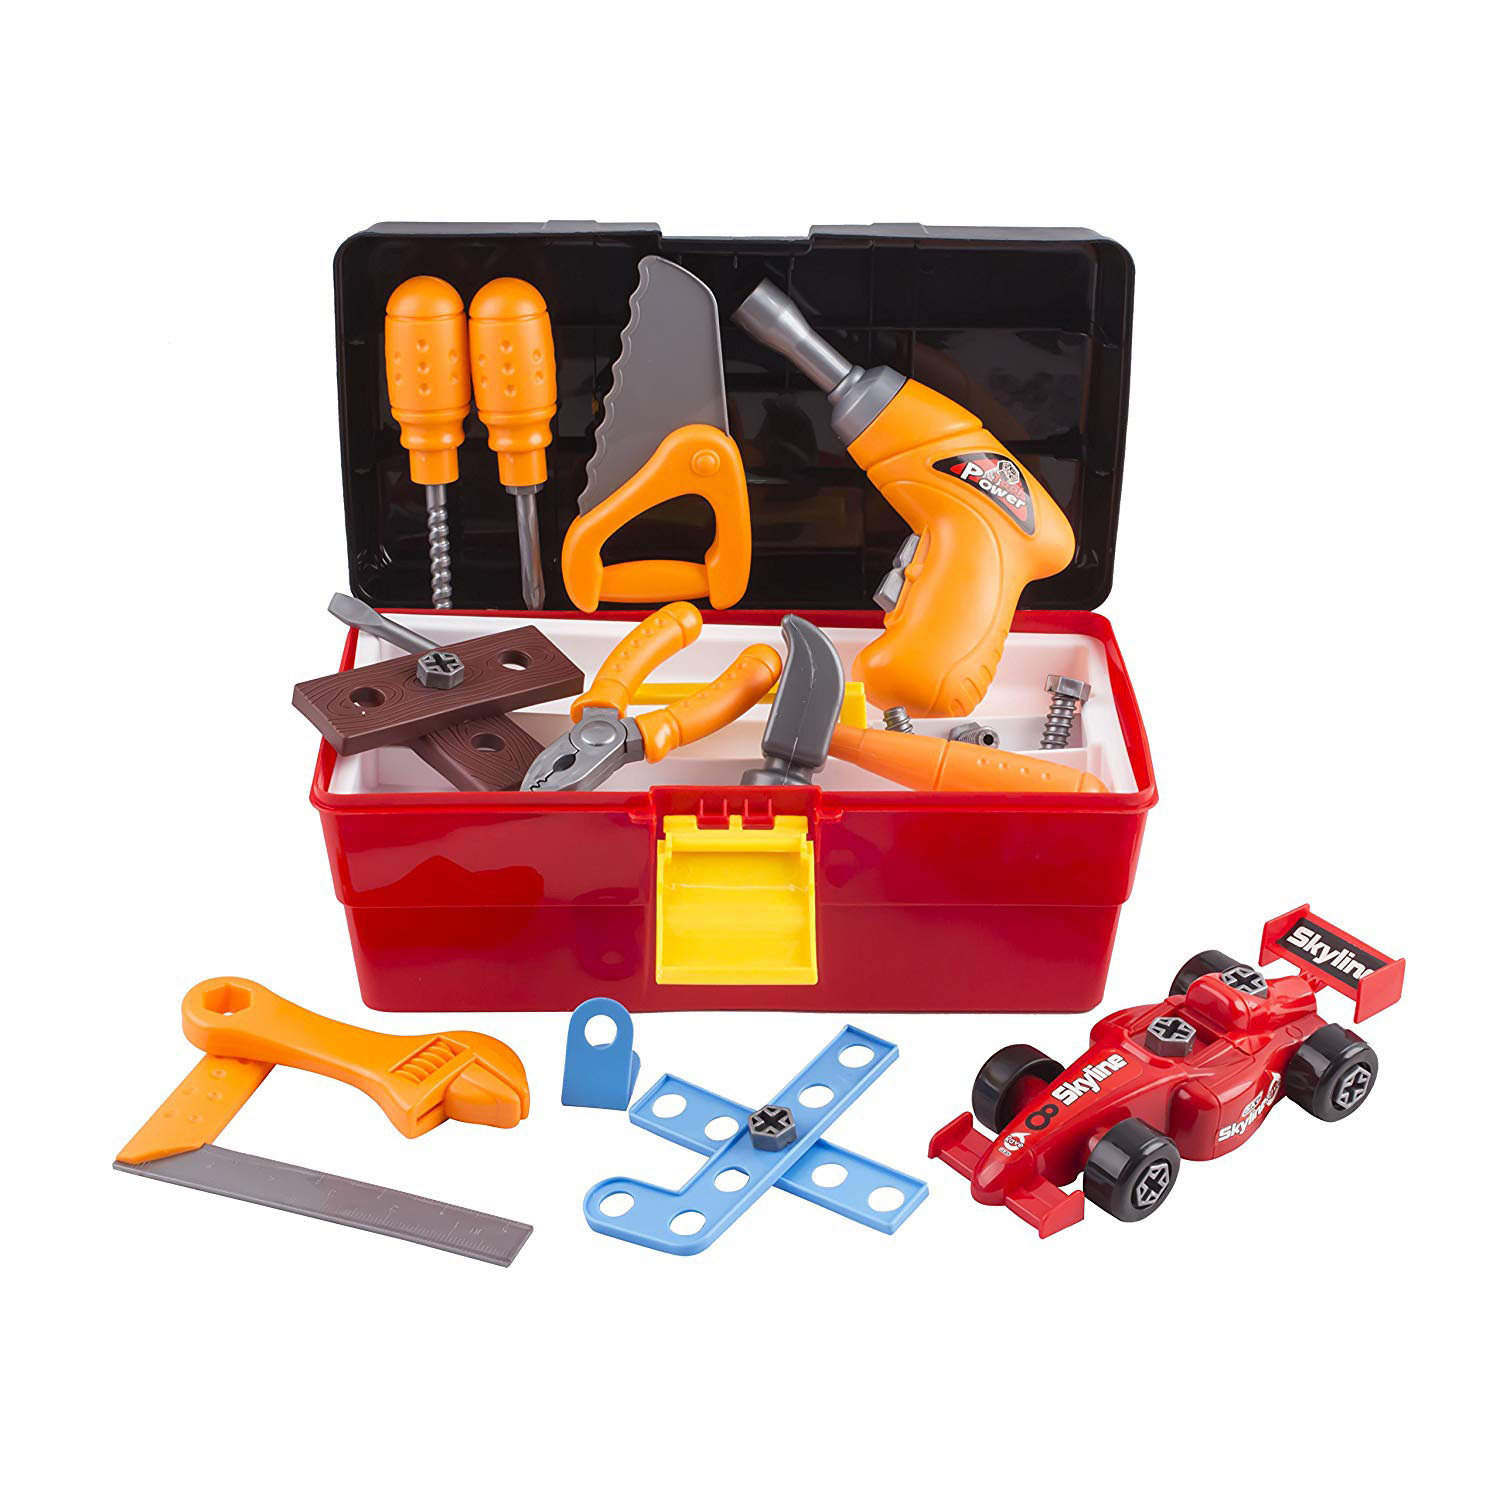 44 Piece Toy Tool Set With Construction Kit Accessories Portable Realistic Tools Box Including Electric Drill Hammer Wrench Screwdriver F1 Car Perfect For Boys Children’s Educational STEM Pretend Play